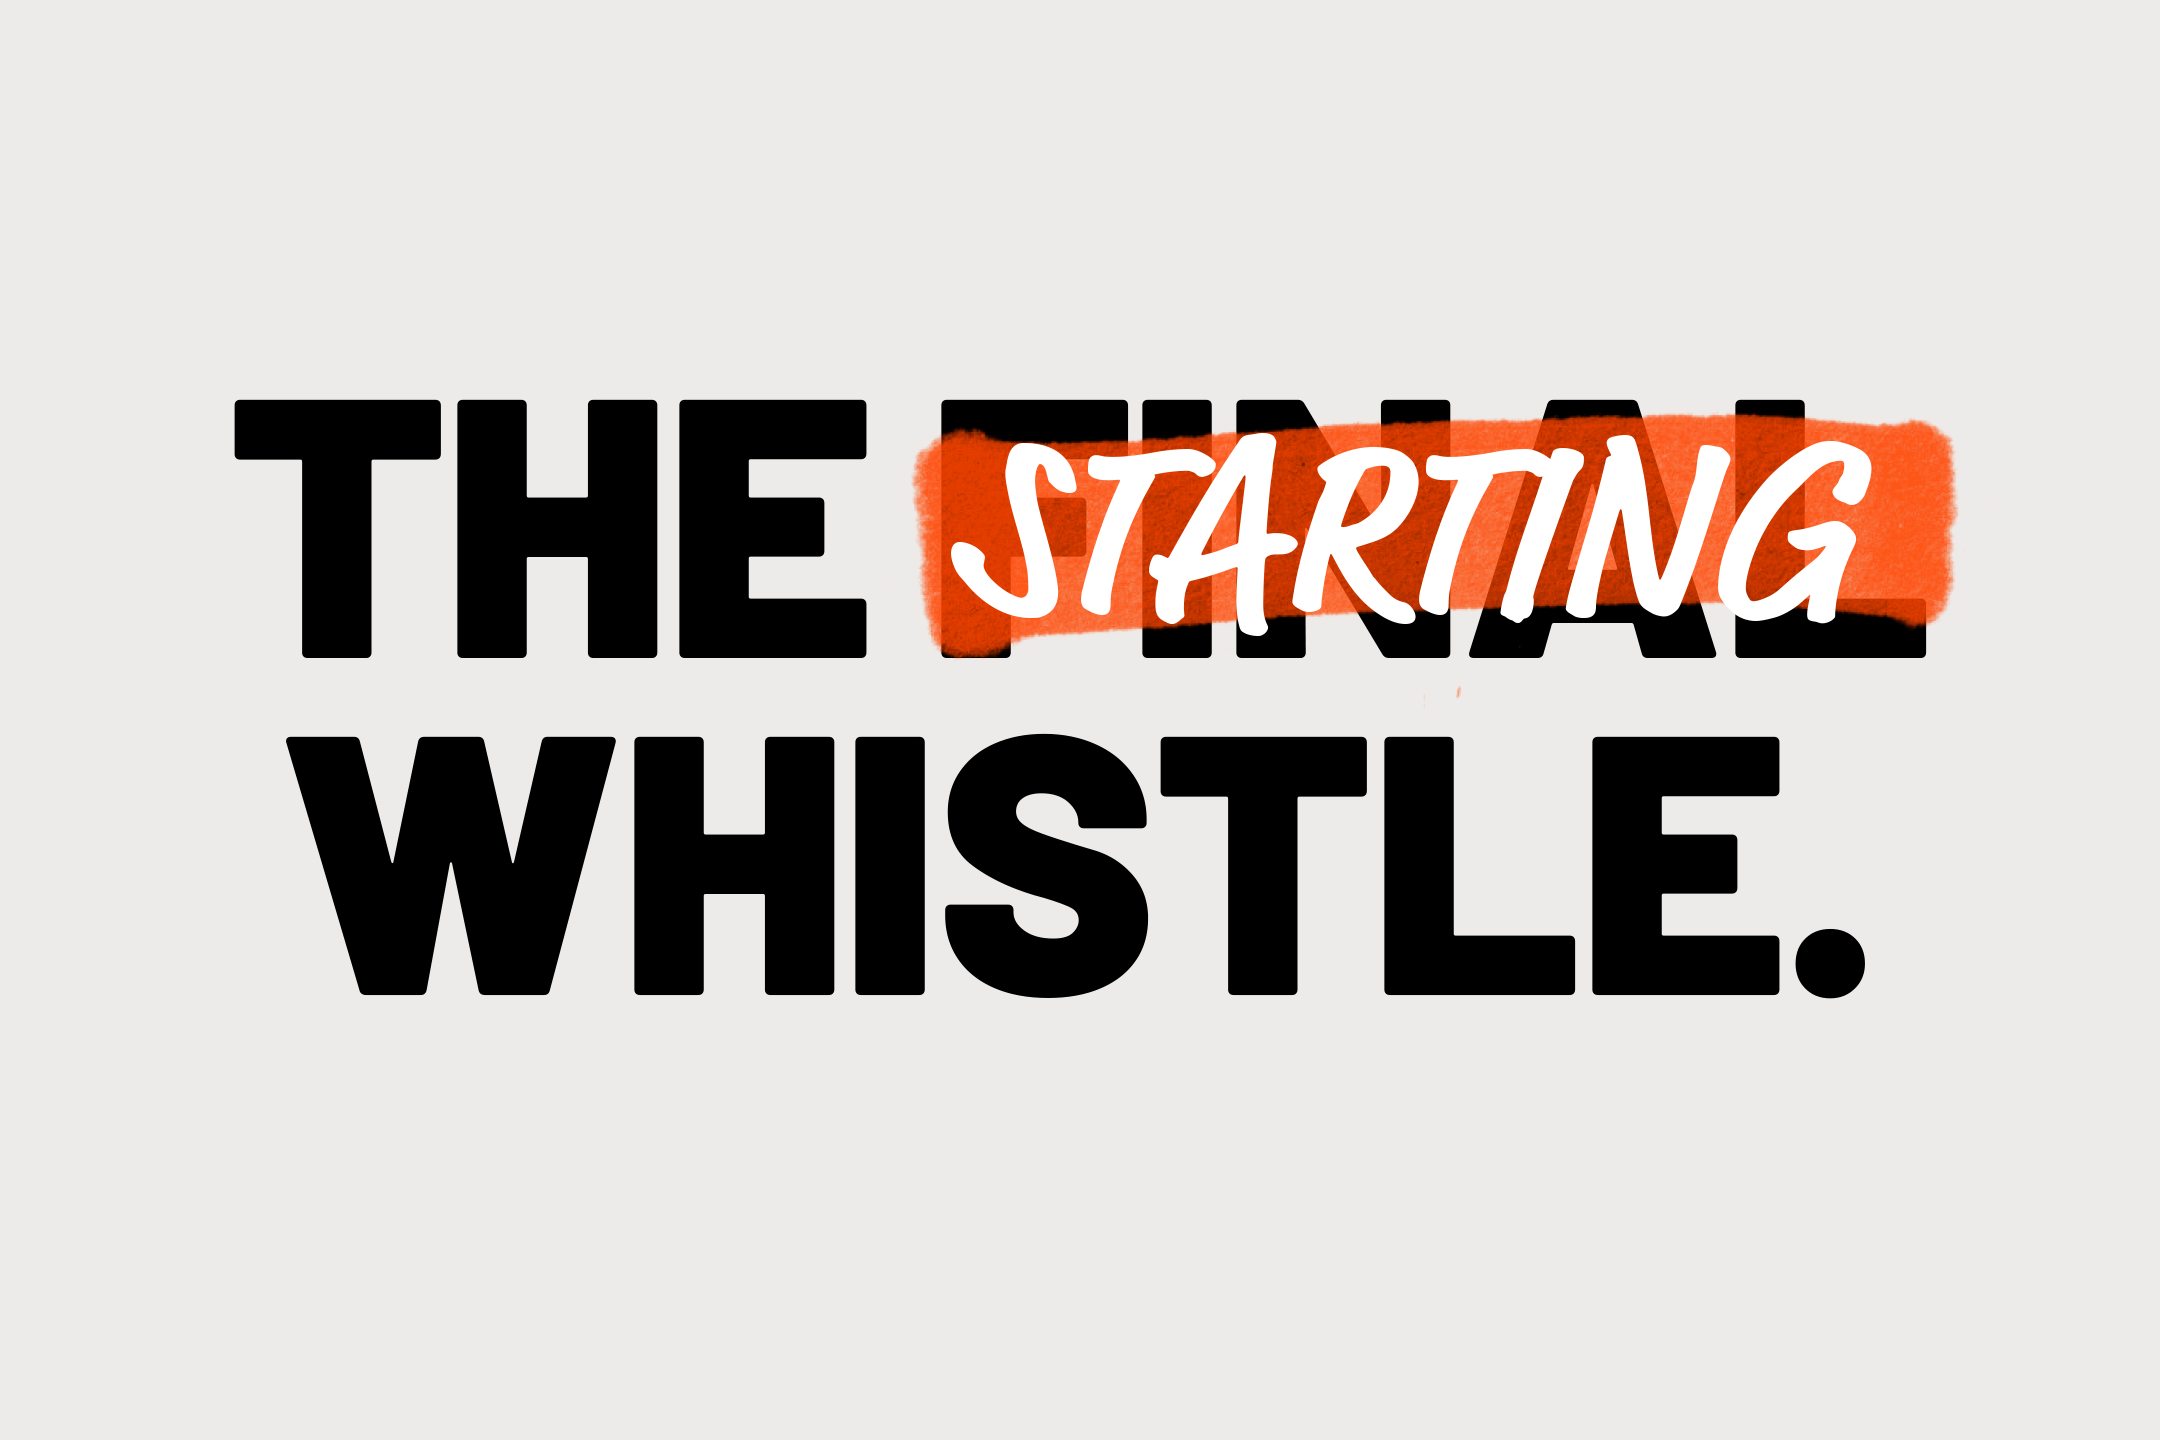 The starting whistle 